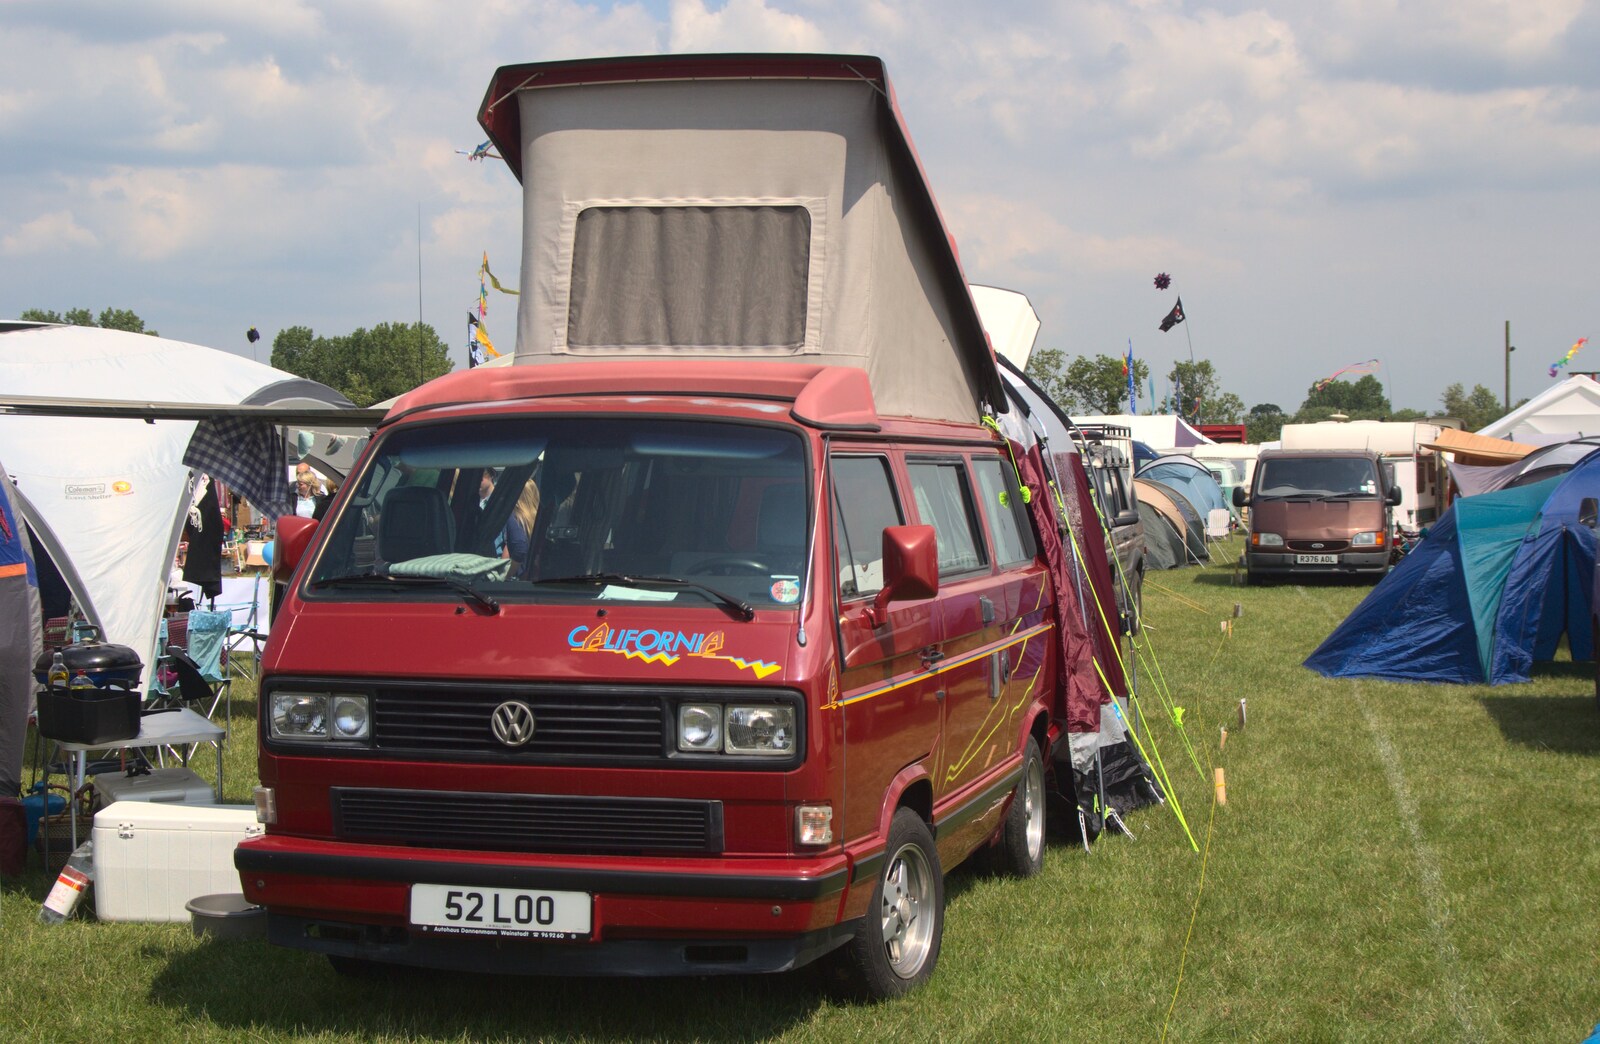 Another T25 van at Alive and V-Dubbin from TouchType at Cubana, BSCC at Gislingham, and Tas Pide, London and Suffolk - 12th June 2011